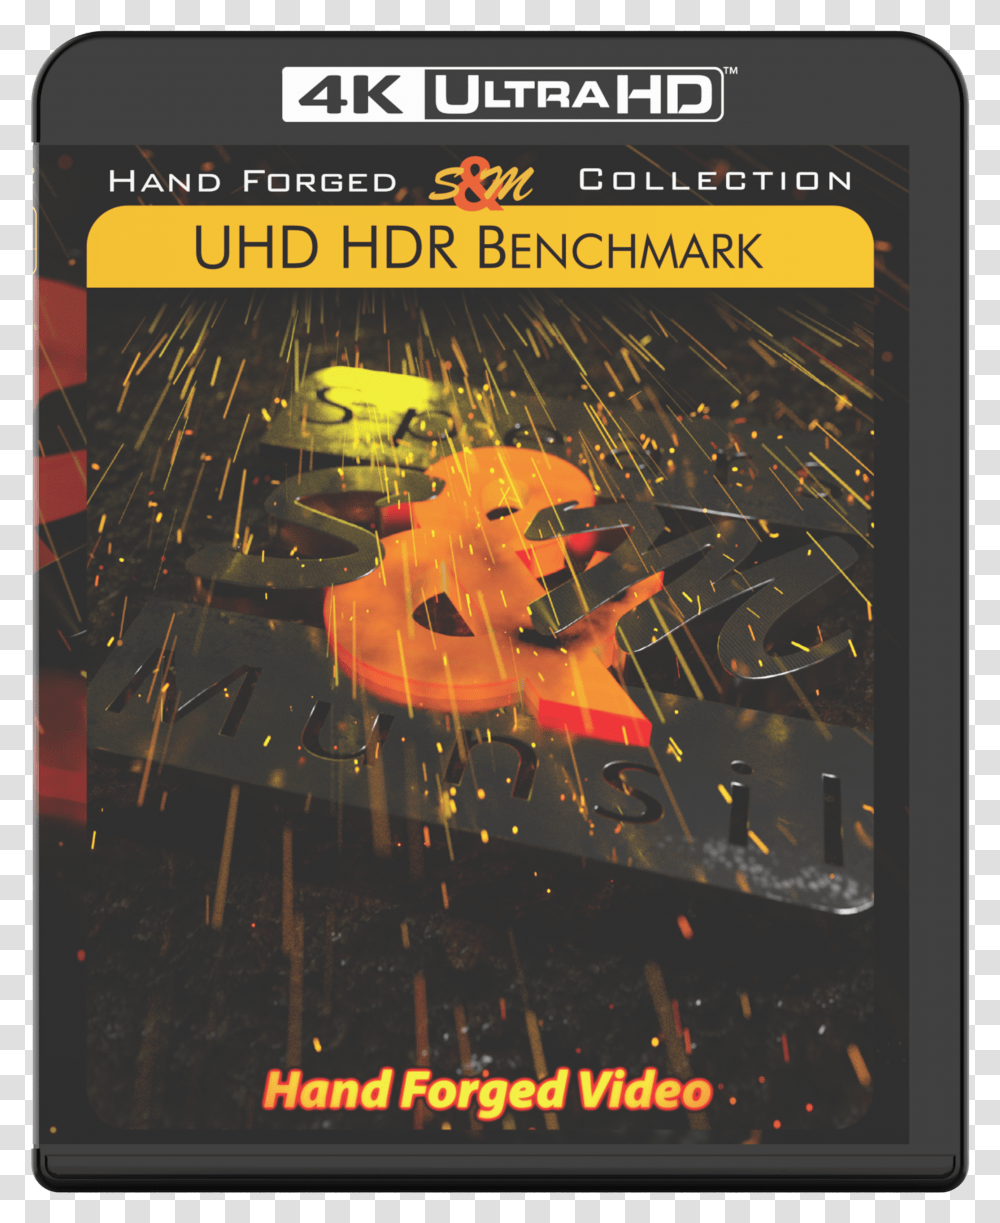 Spears Amp Munsil Uhd Hdr Benchmark Transparent Png